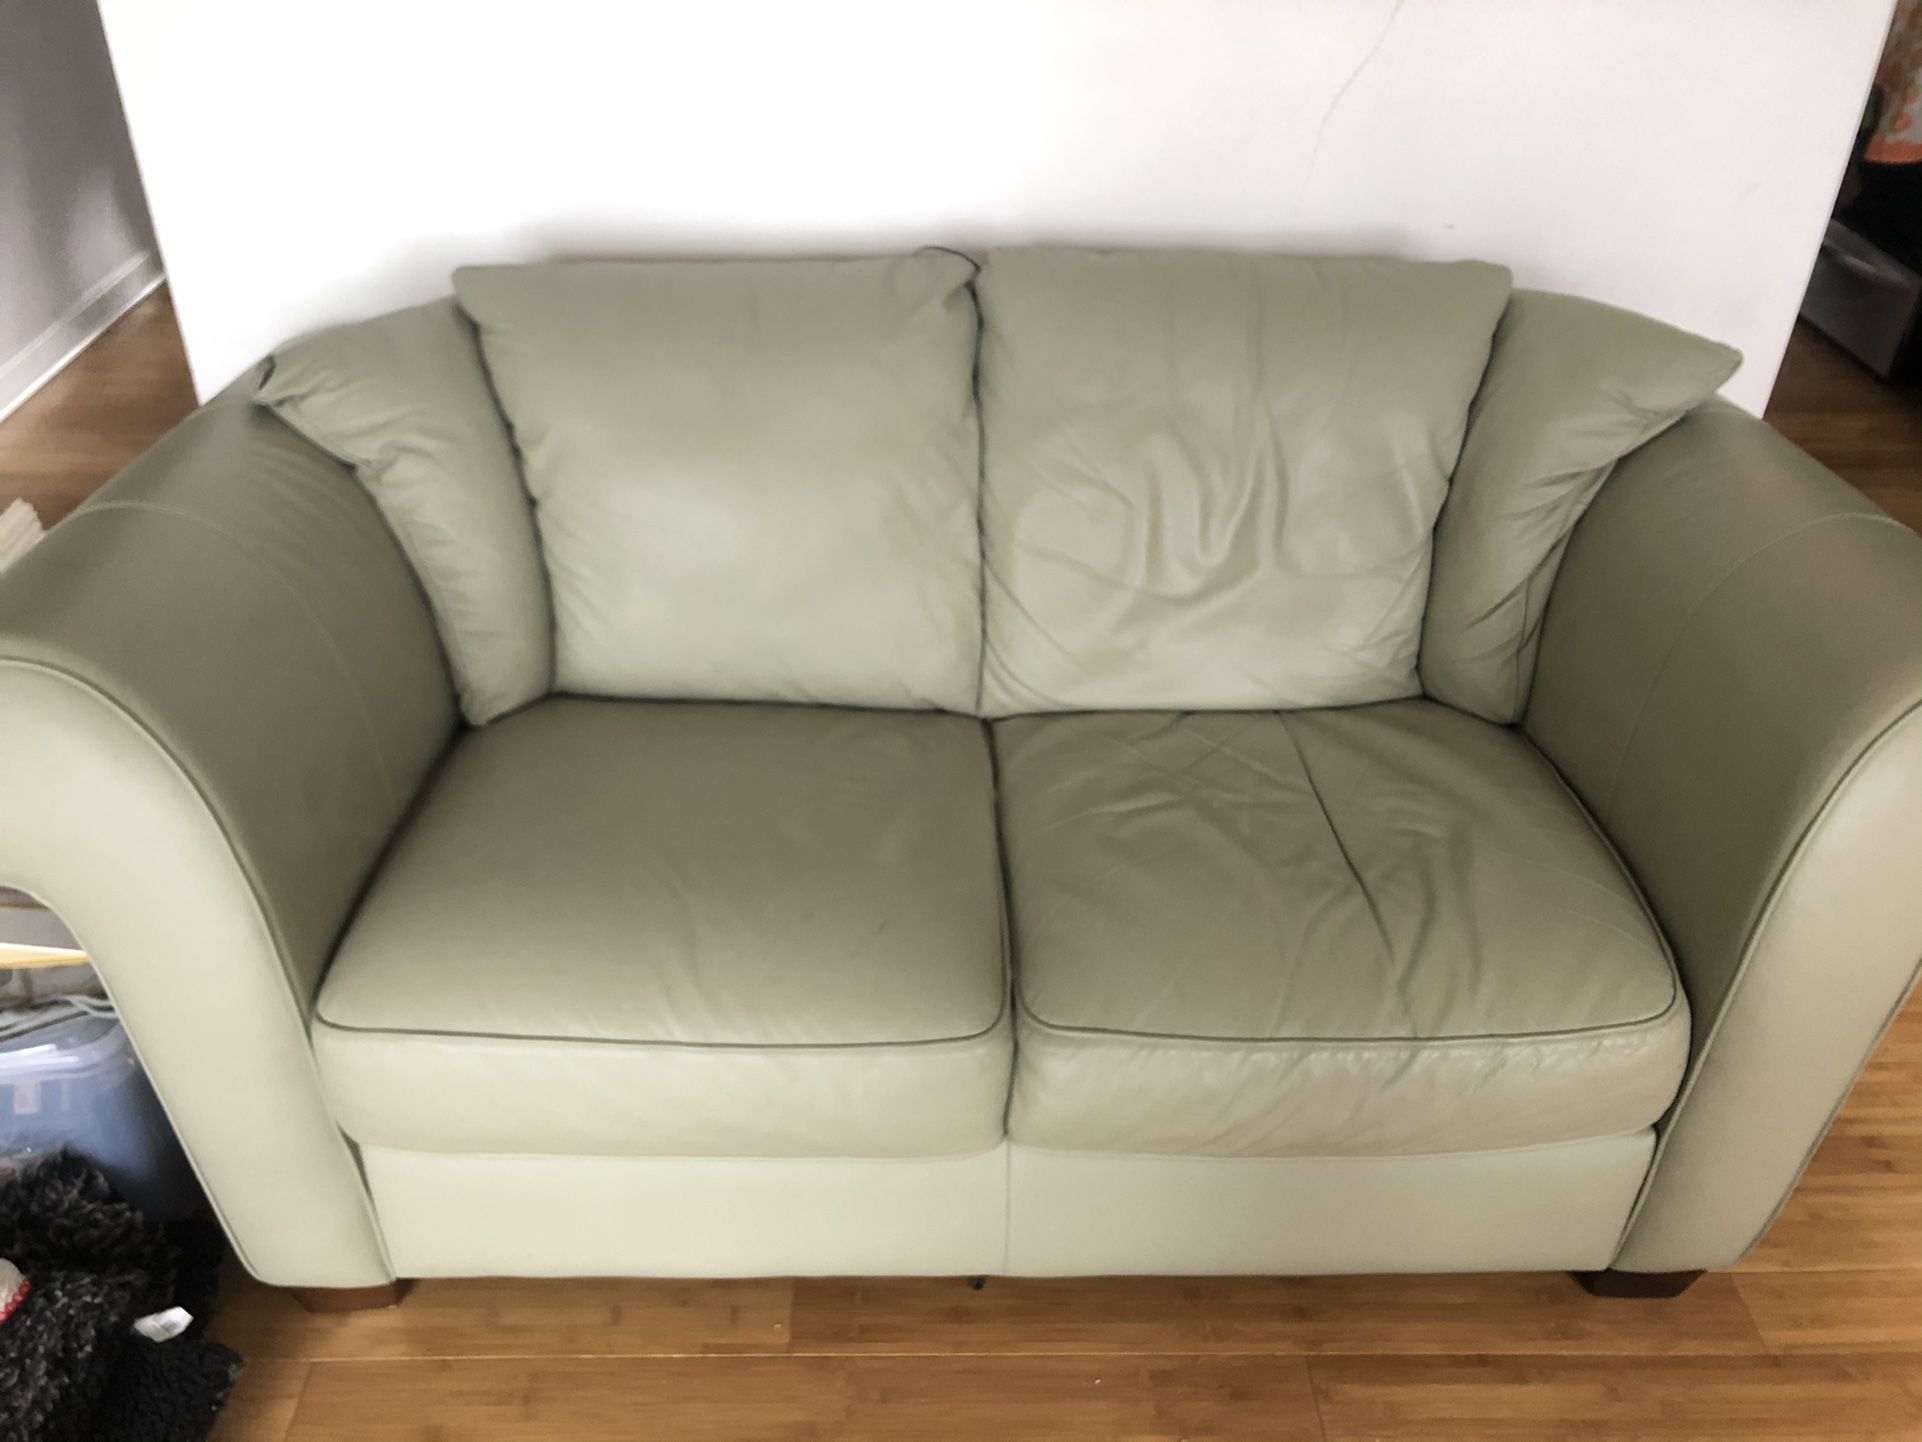 Stunning Green Leather 2 Person Couch